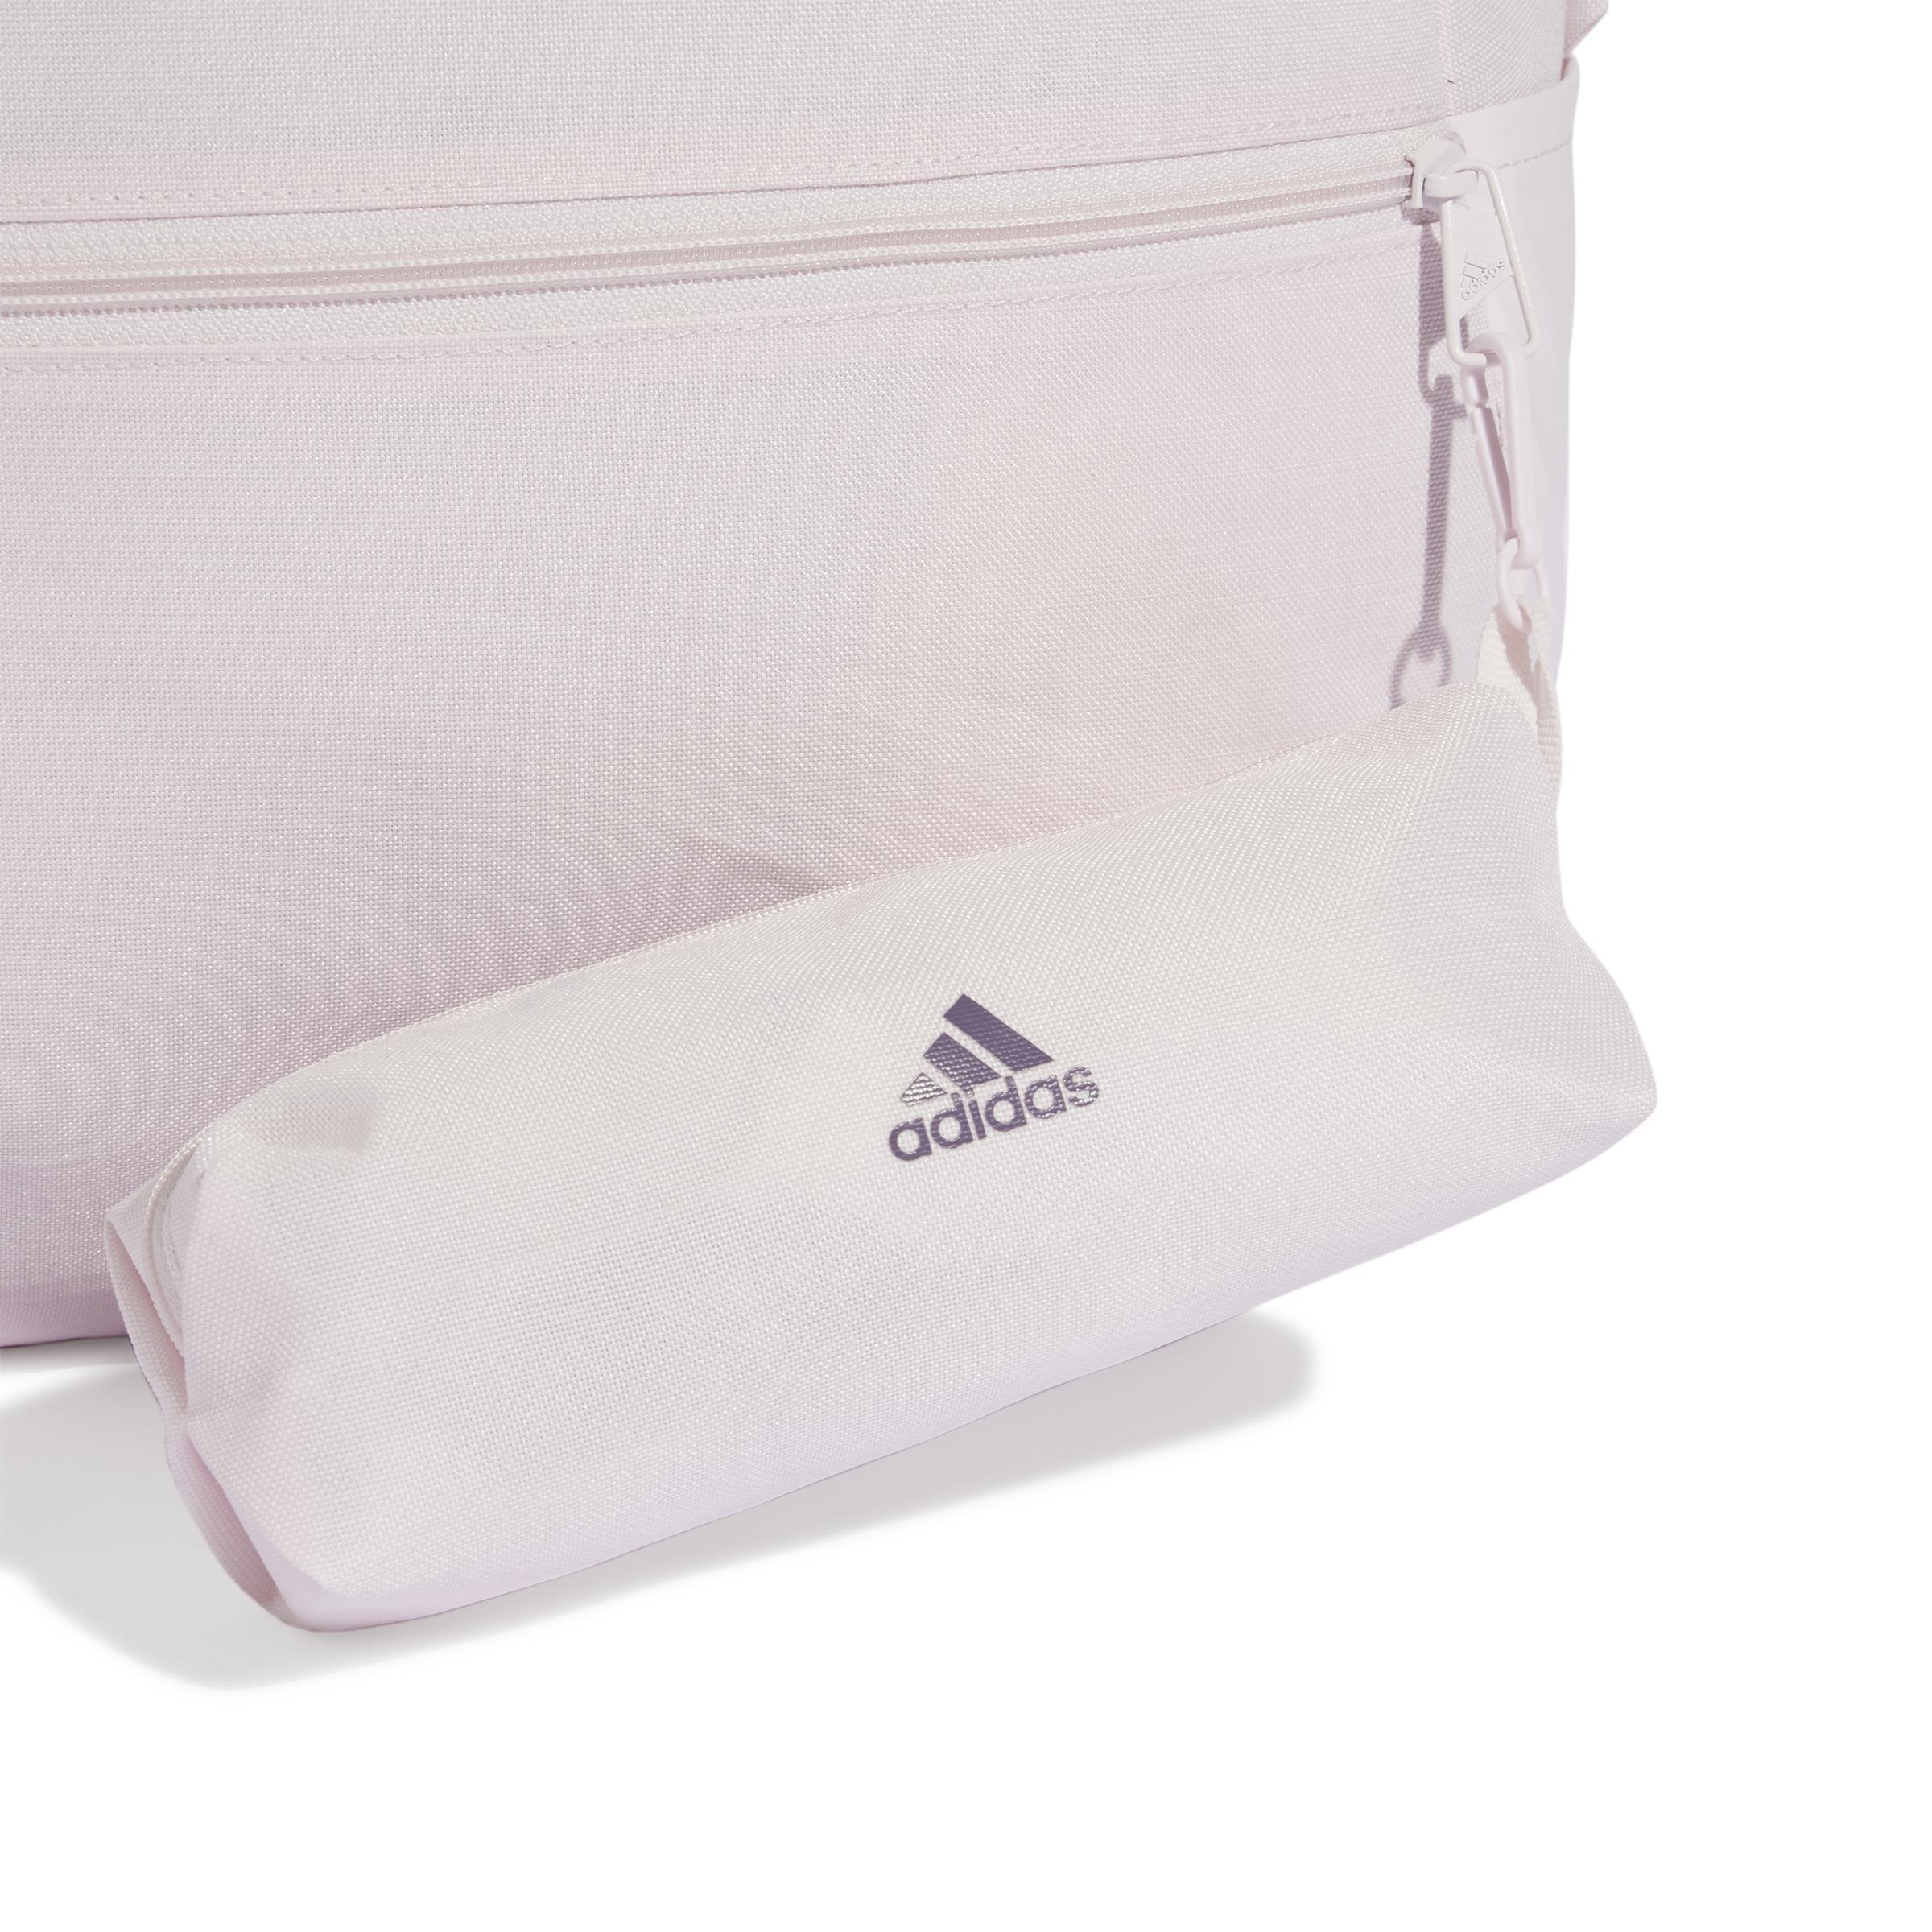 adidas - Unisex Classic 3-Stripes Backpack, Pink